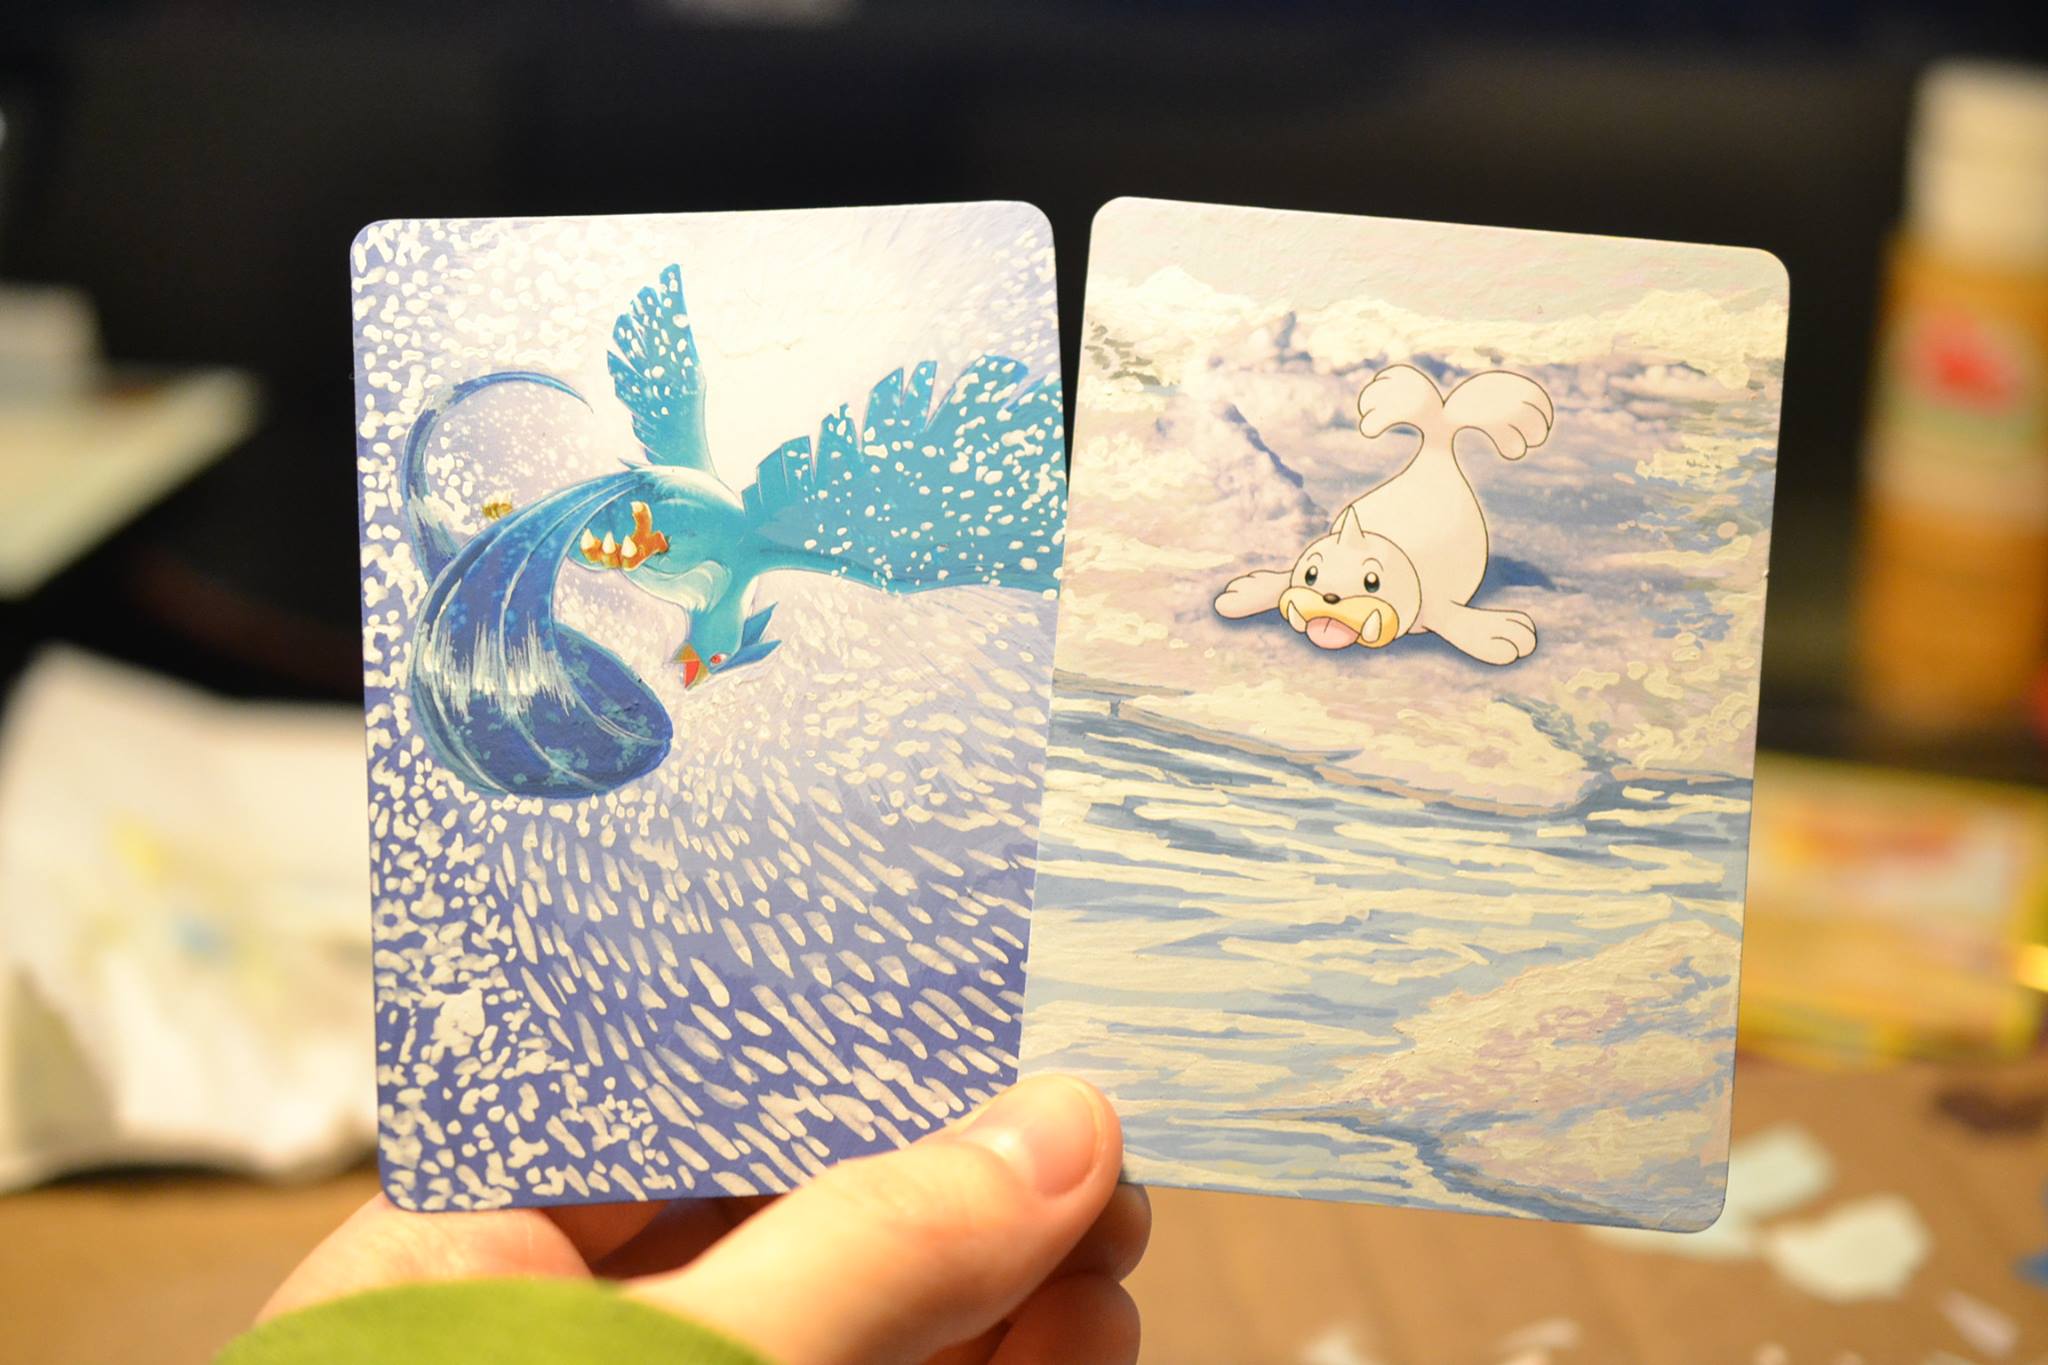 How To Make Pokemon Cards Even Better: Paint Them 